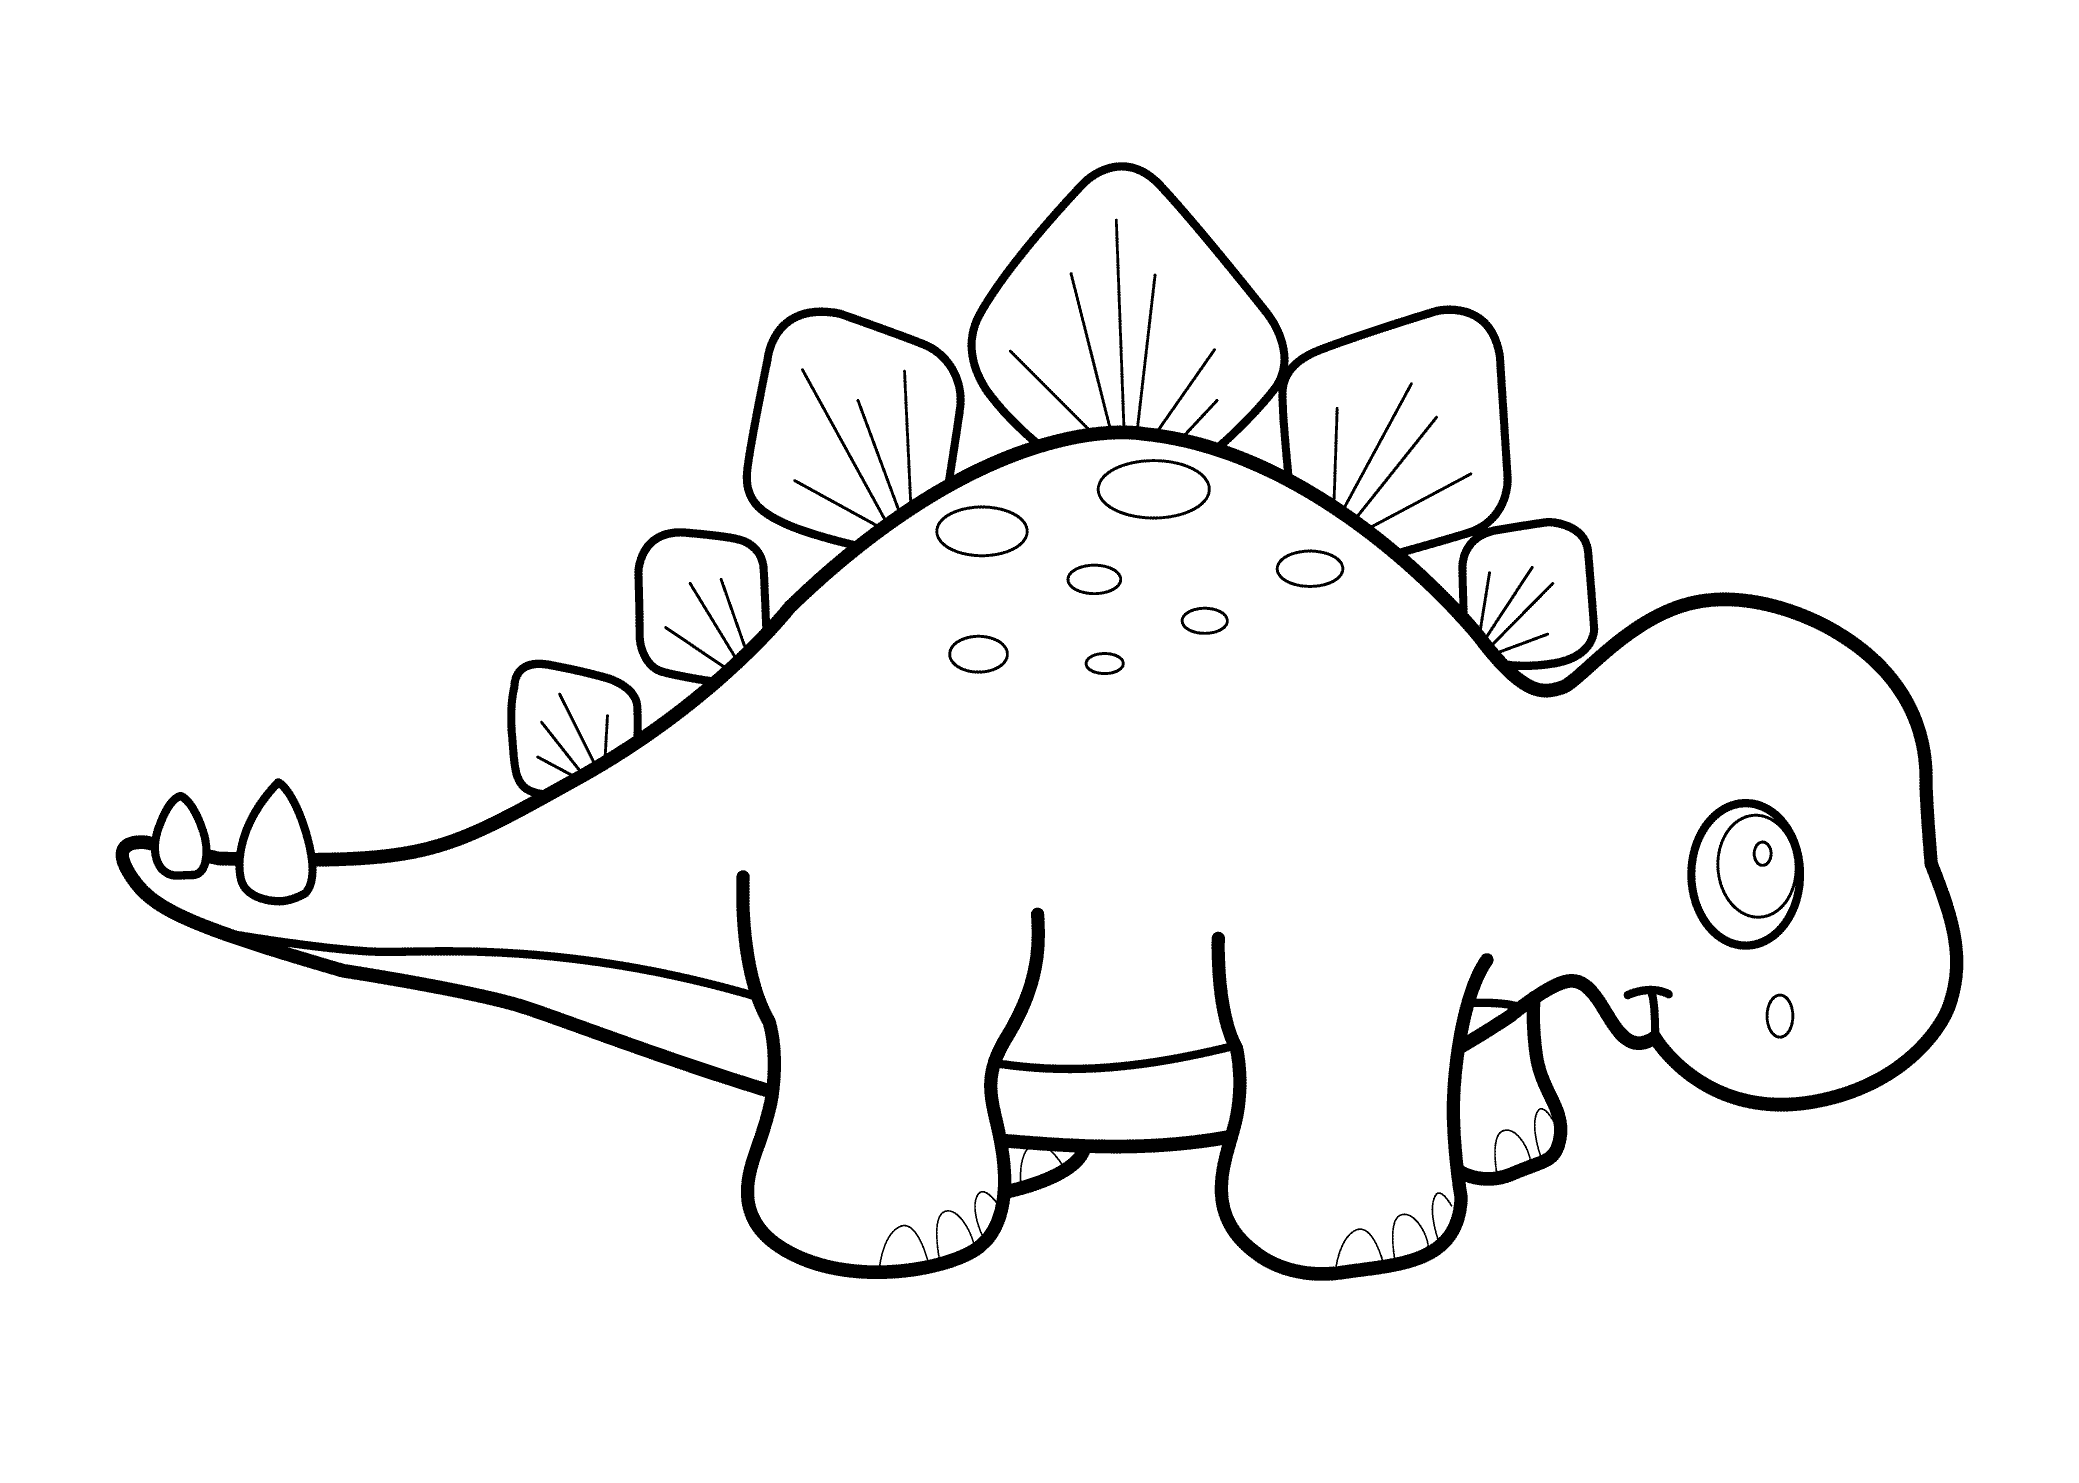 Cartoon Coloring Pages For Preschoolers - Coloring Pages For All Ages